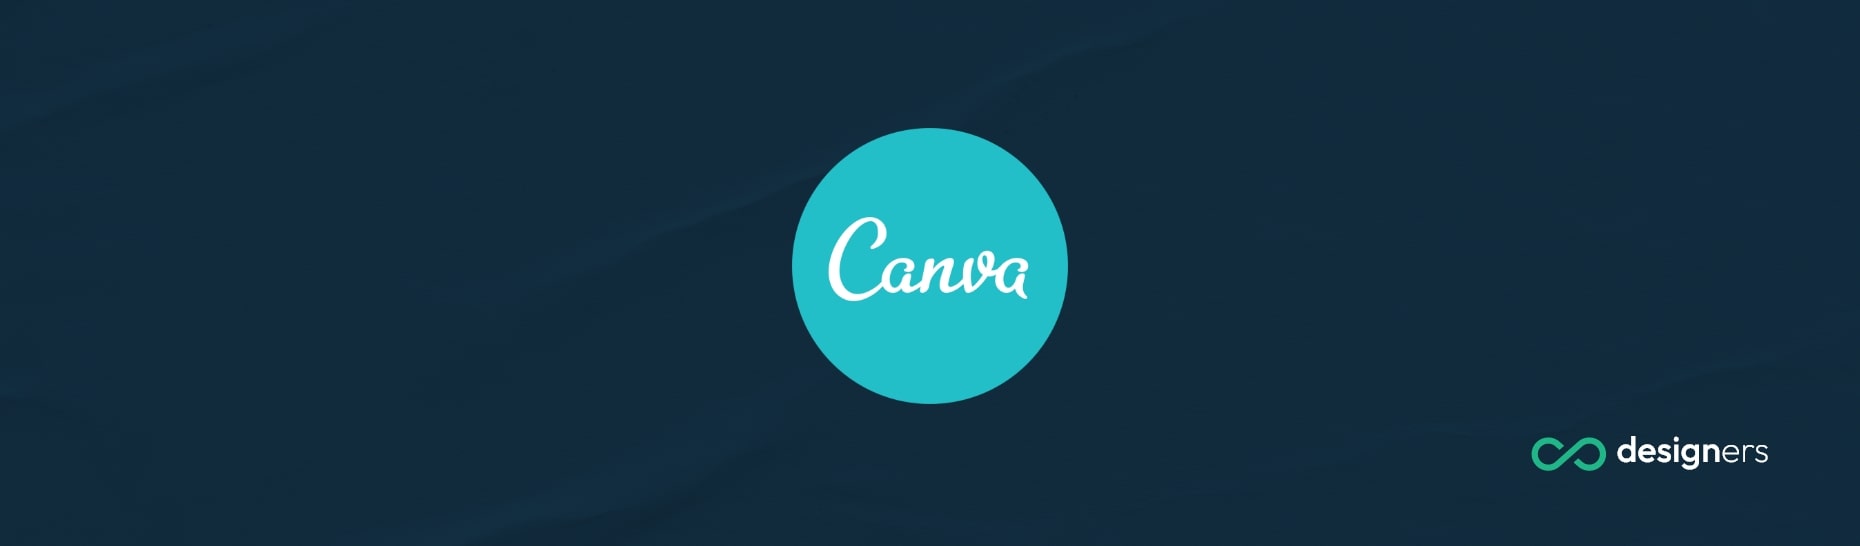 How Do I Change the Color of an Image in Canva?